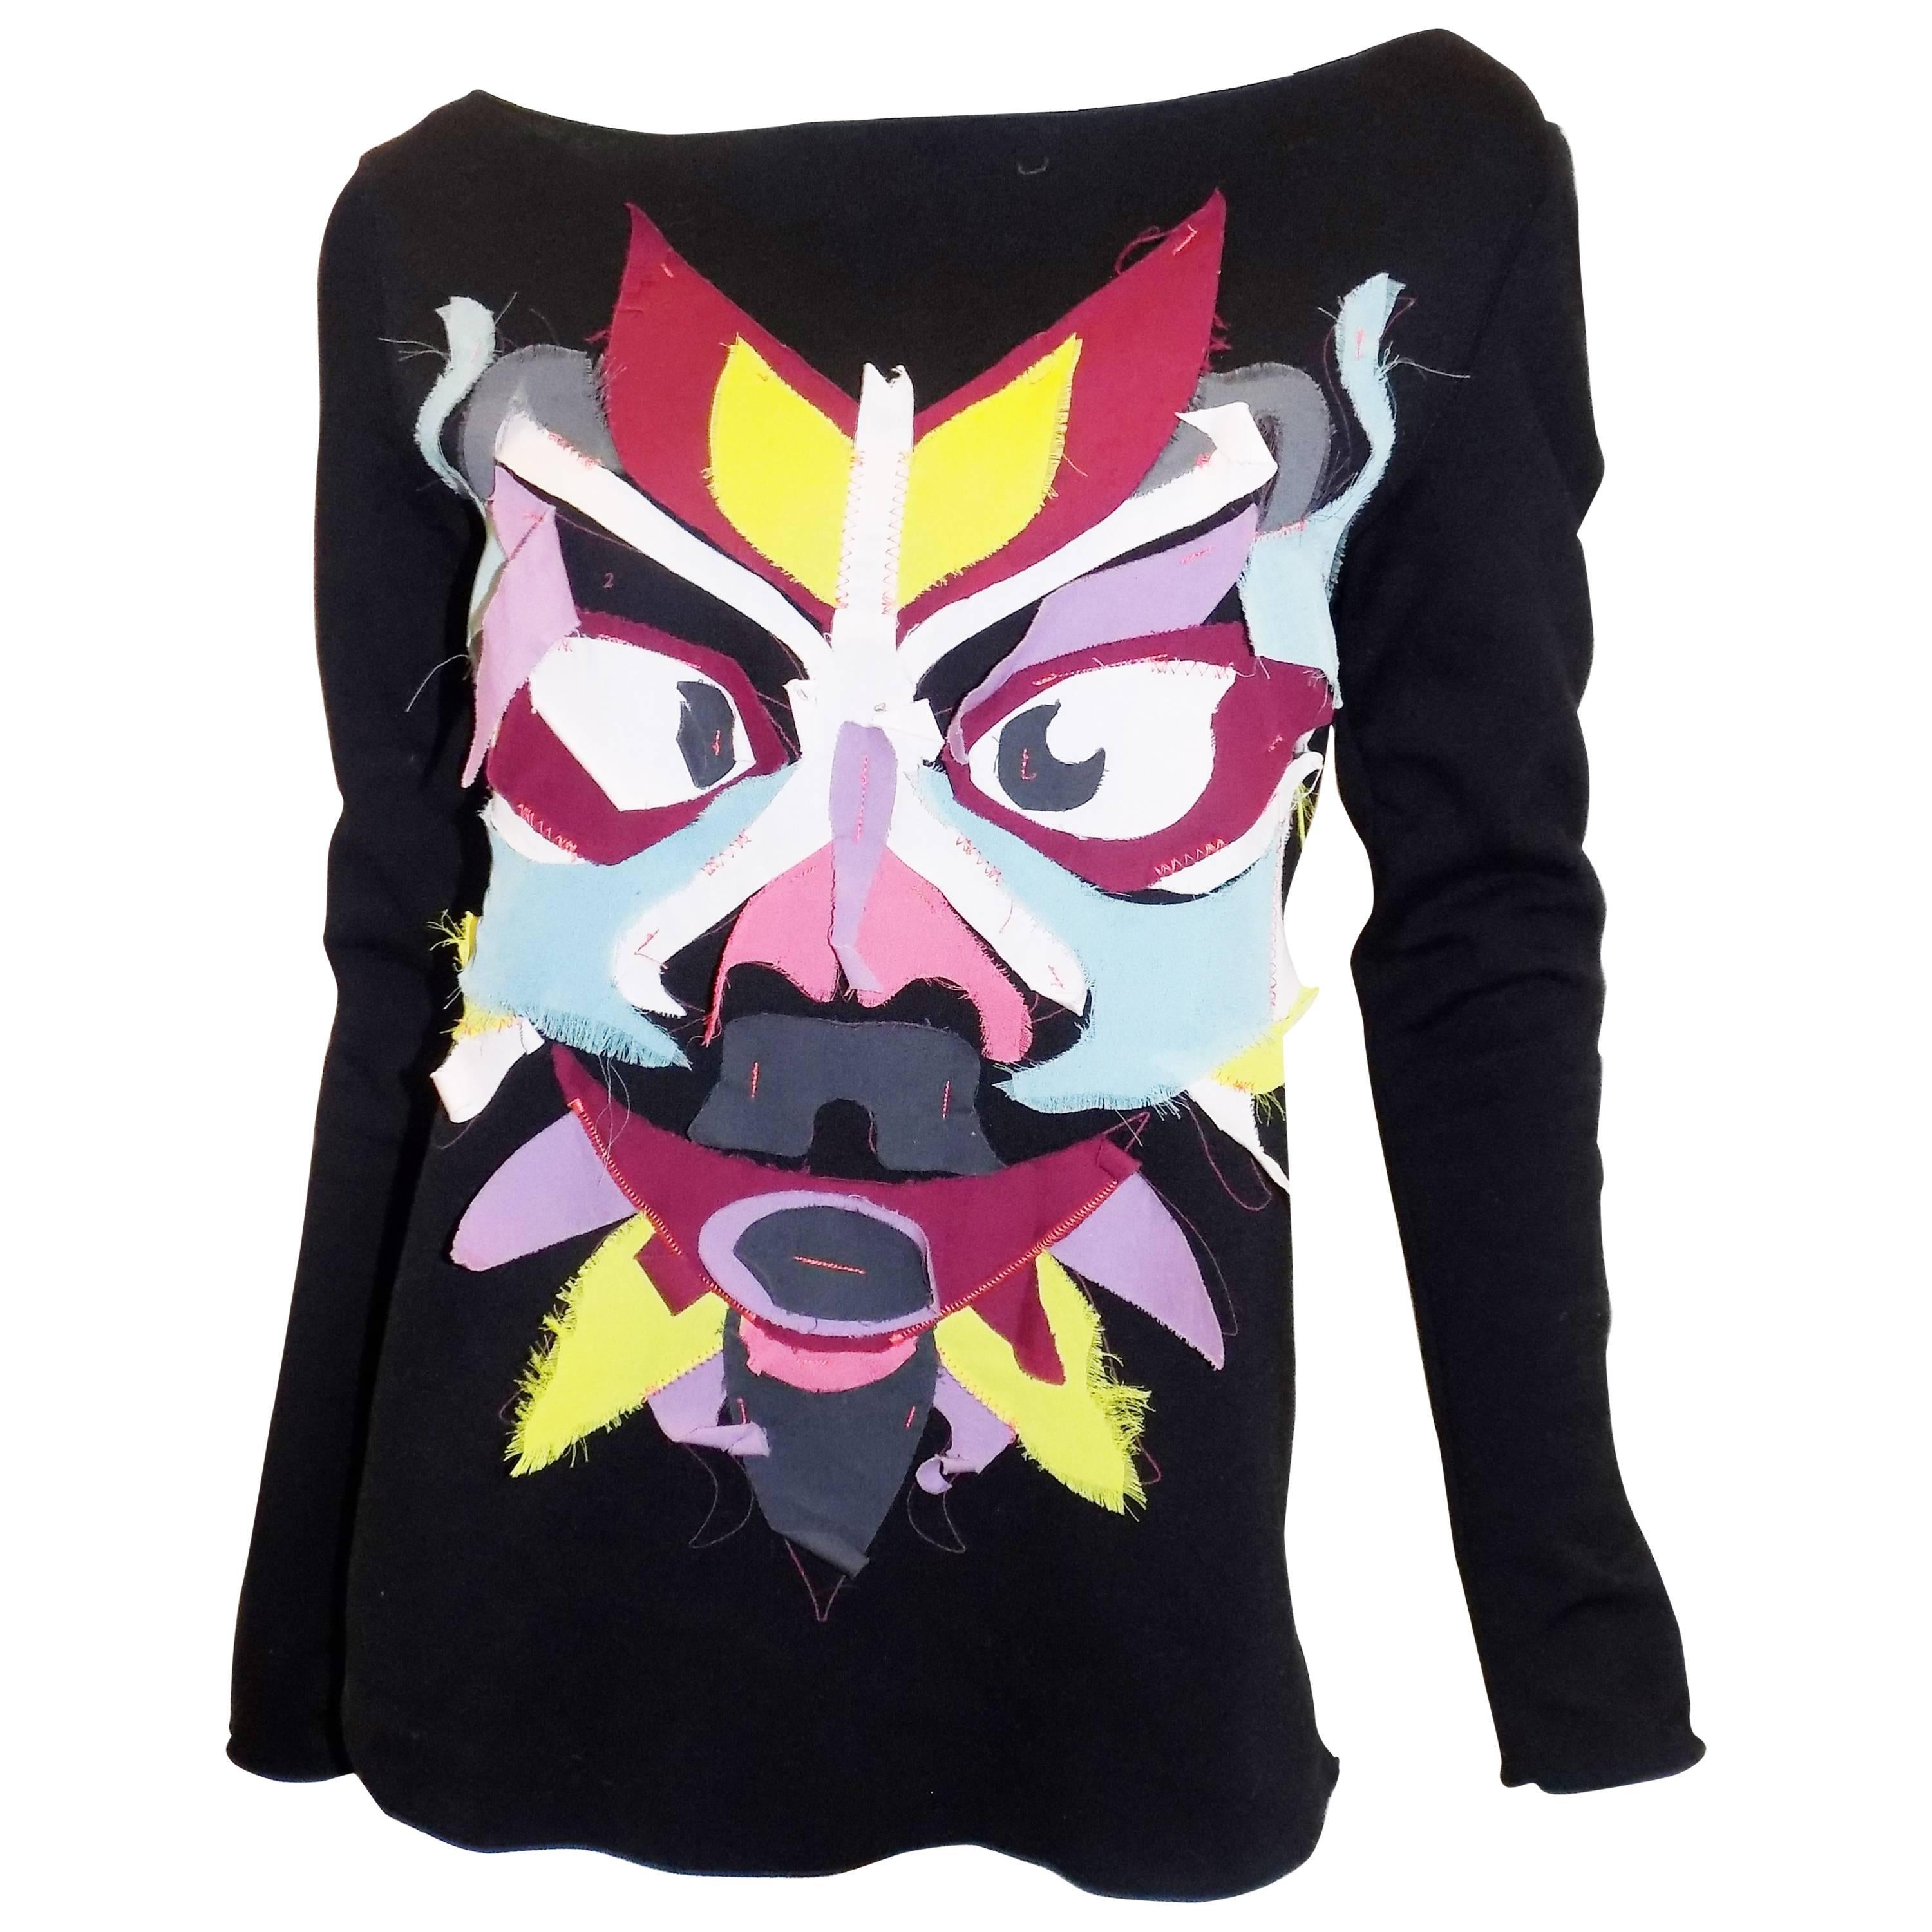 Kenzo "TOTEM" patchwork top swater For Sale